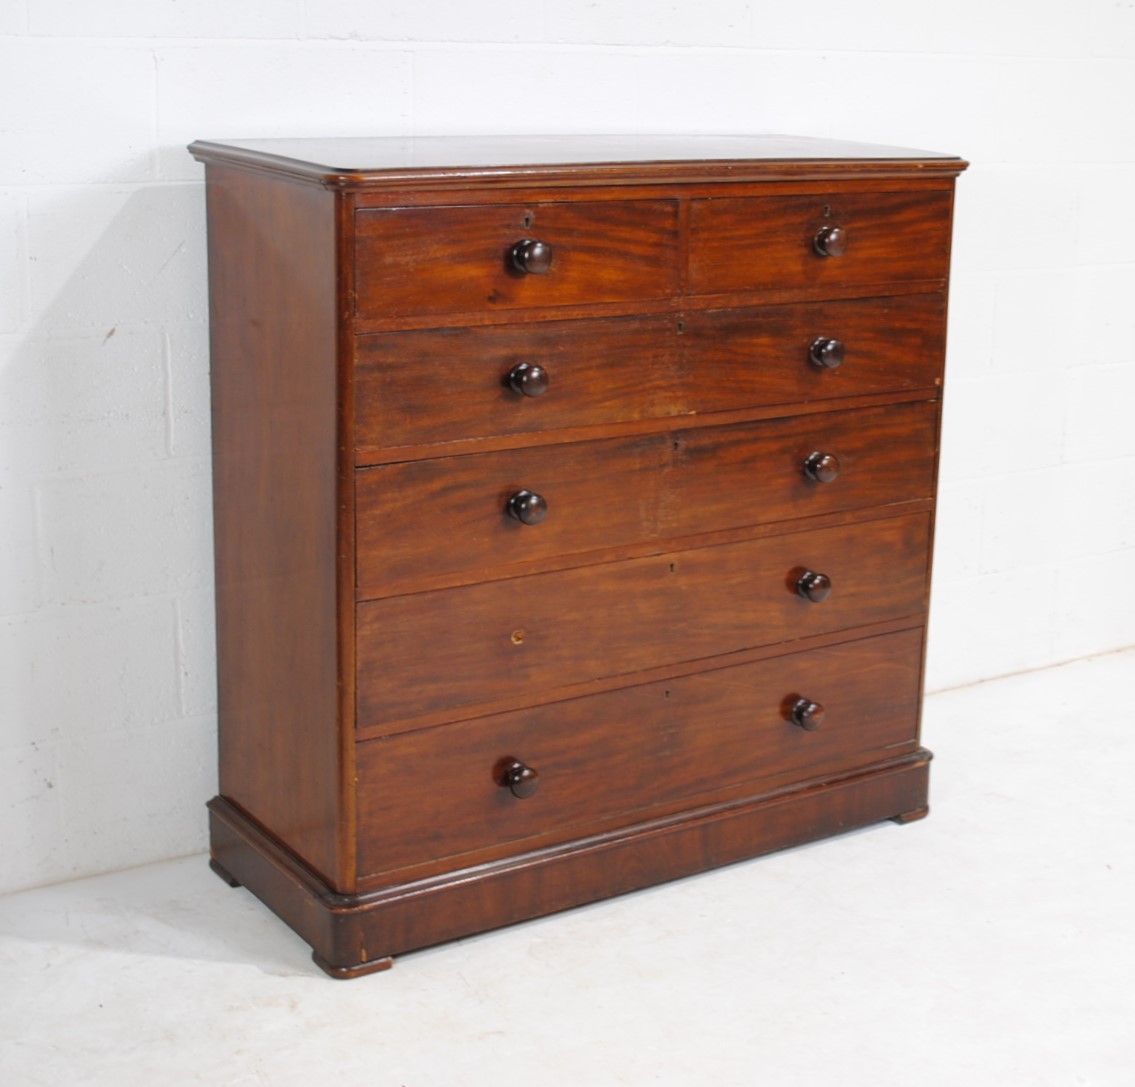 A Victorian mahogany chest of six drawers, with turned handles - one piece of trim & one handle - Image 2 of 9